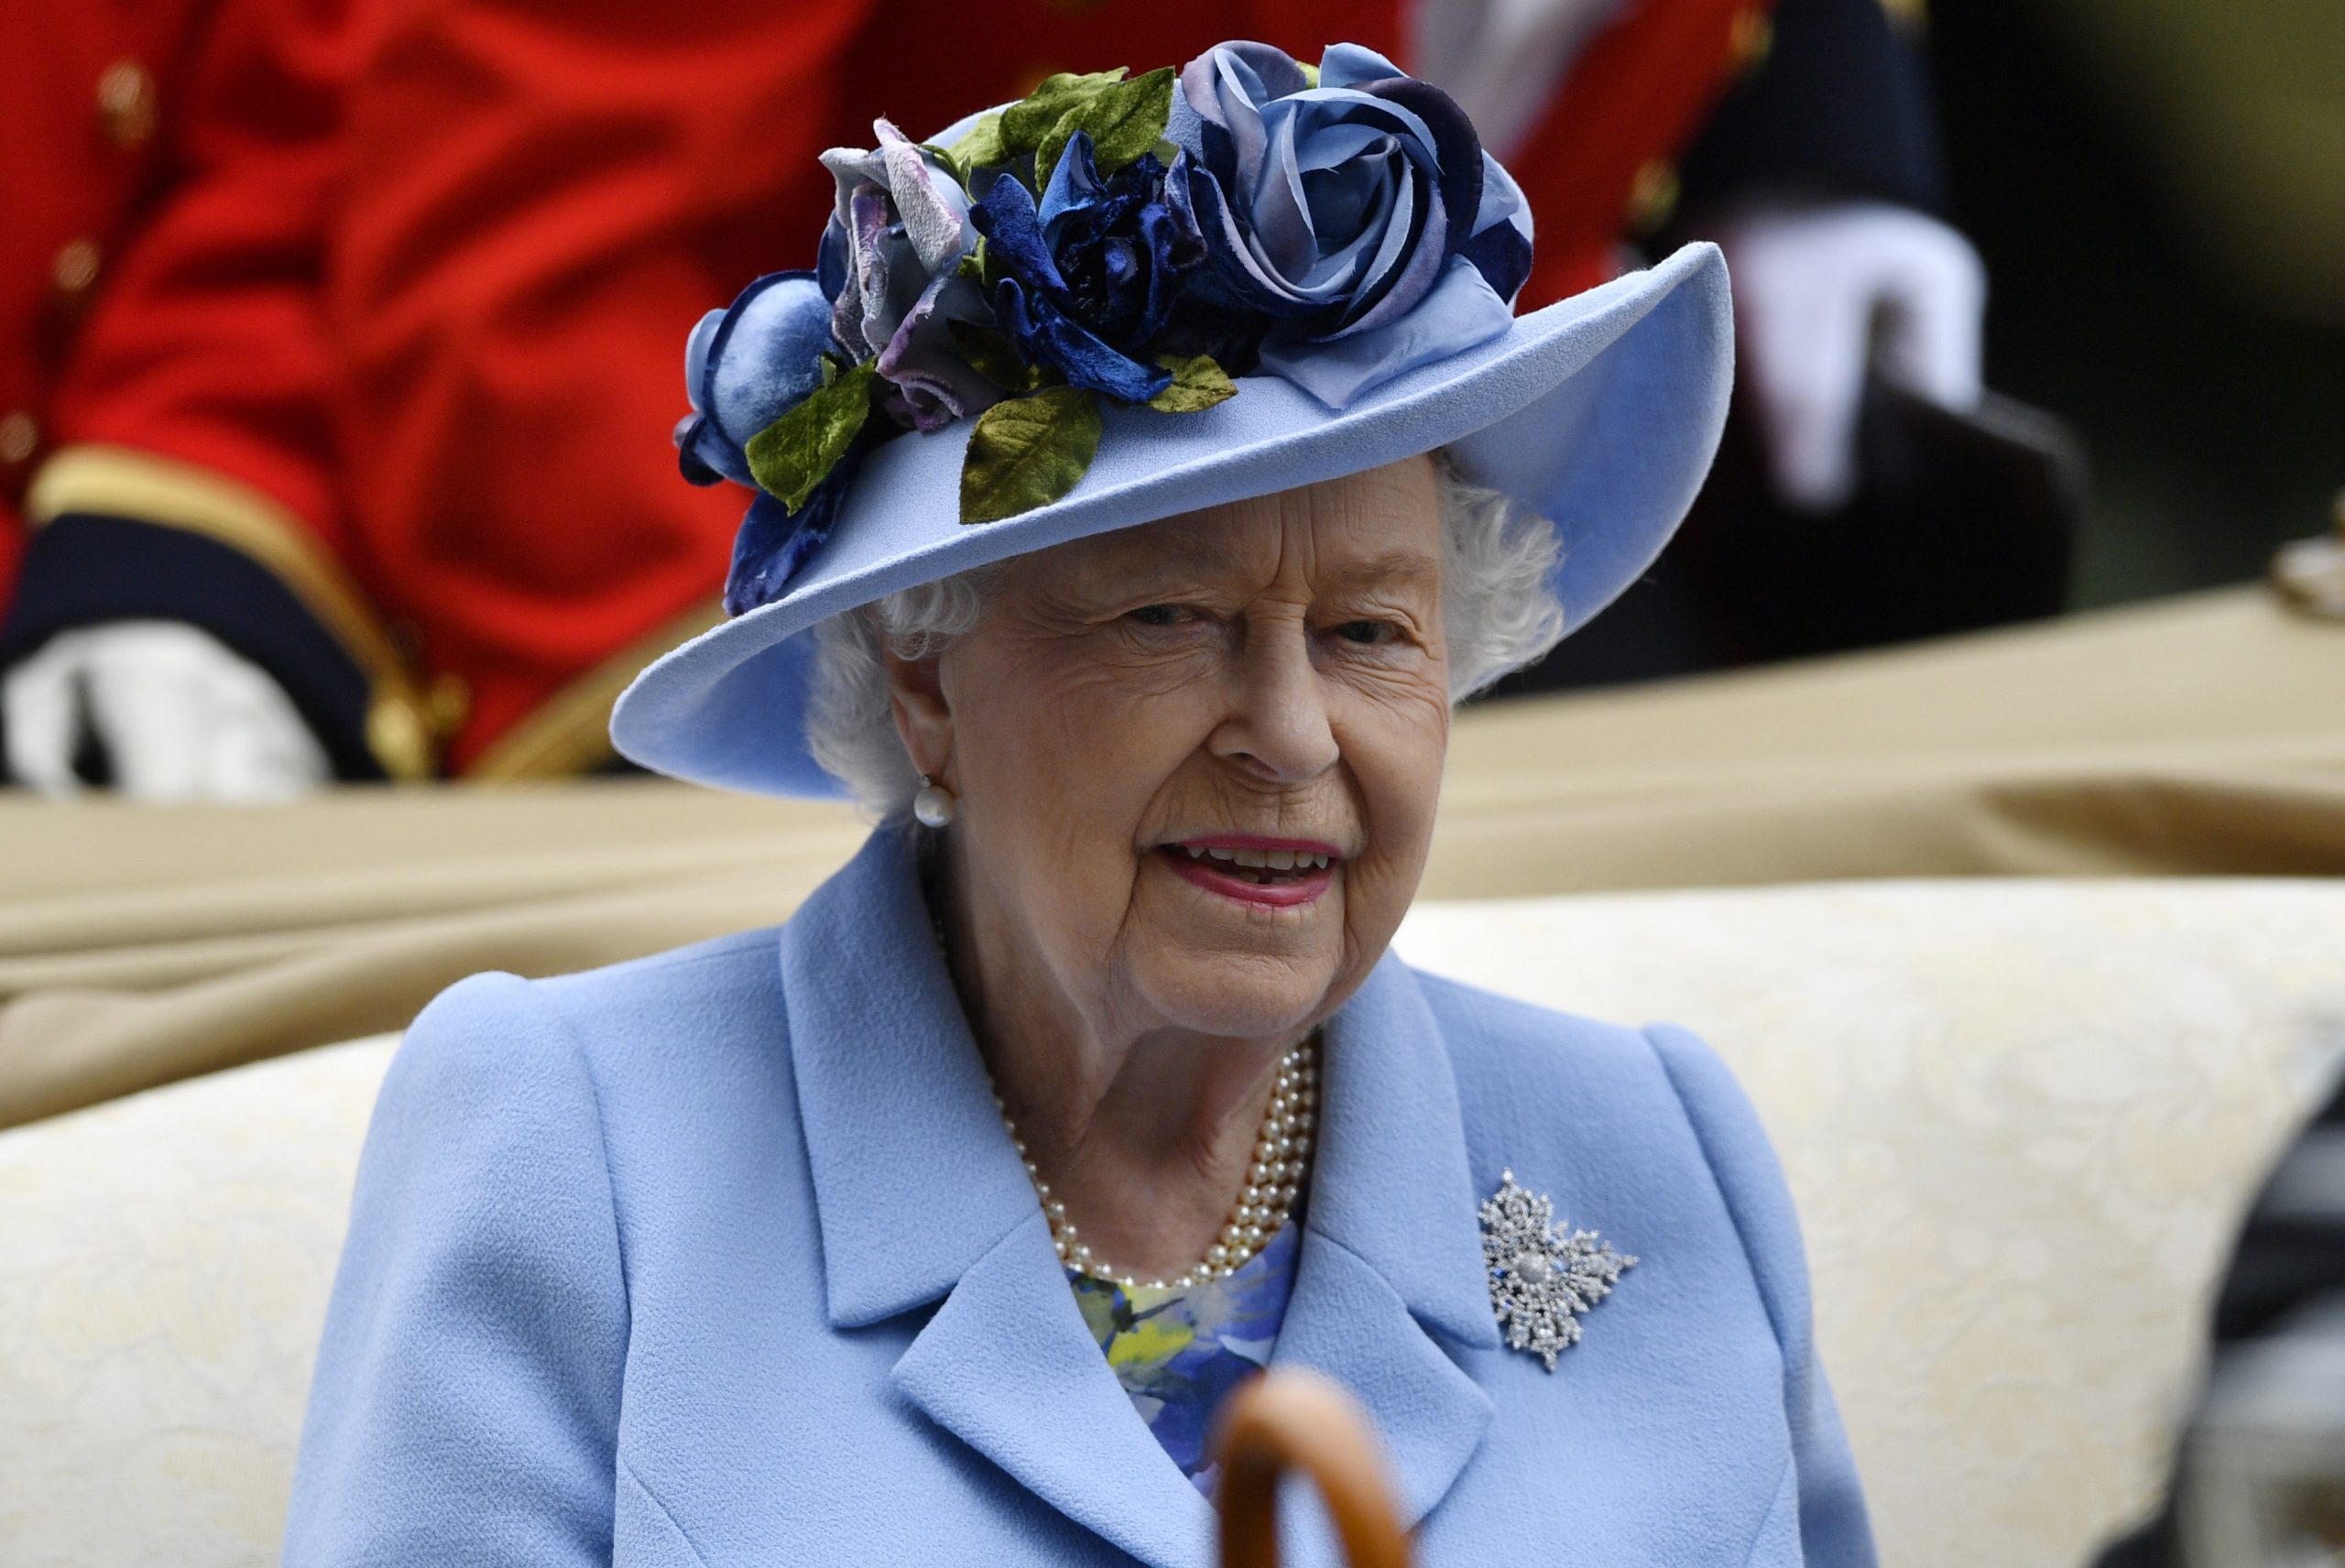 Queen Elizabeth II, Whose Great-Great-Grandmother was Hungarian, Celebrates 95th Birthday